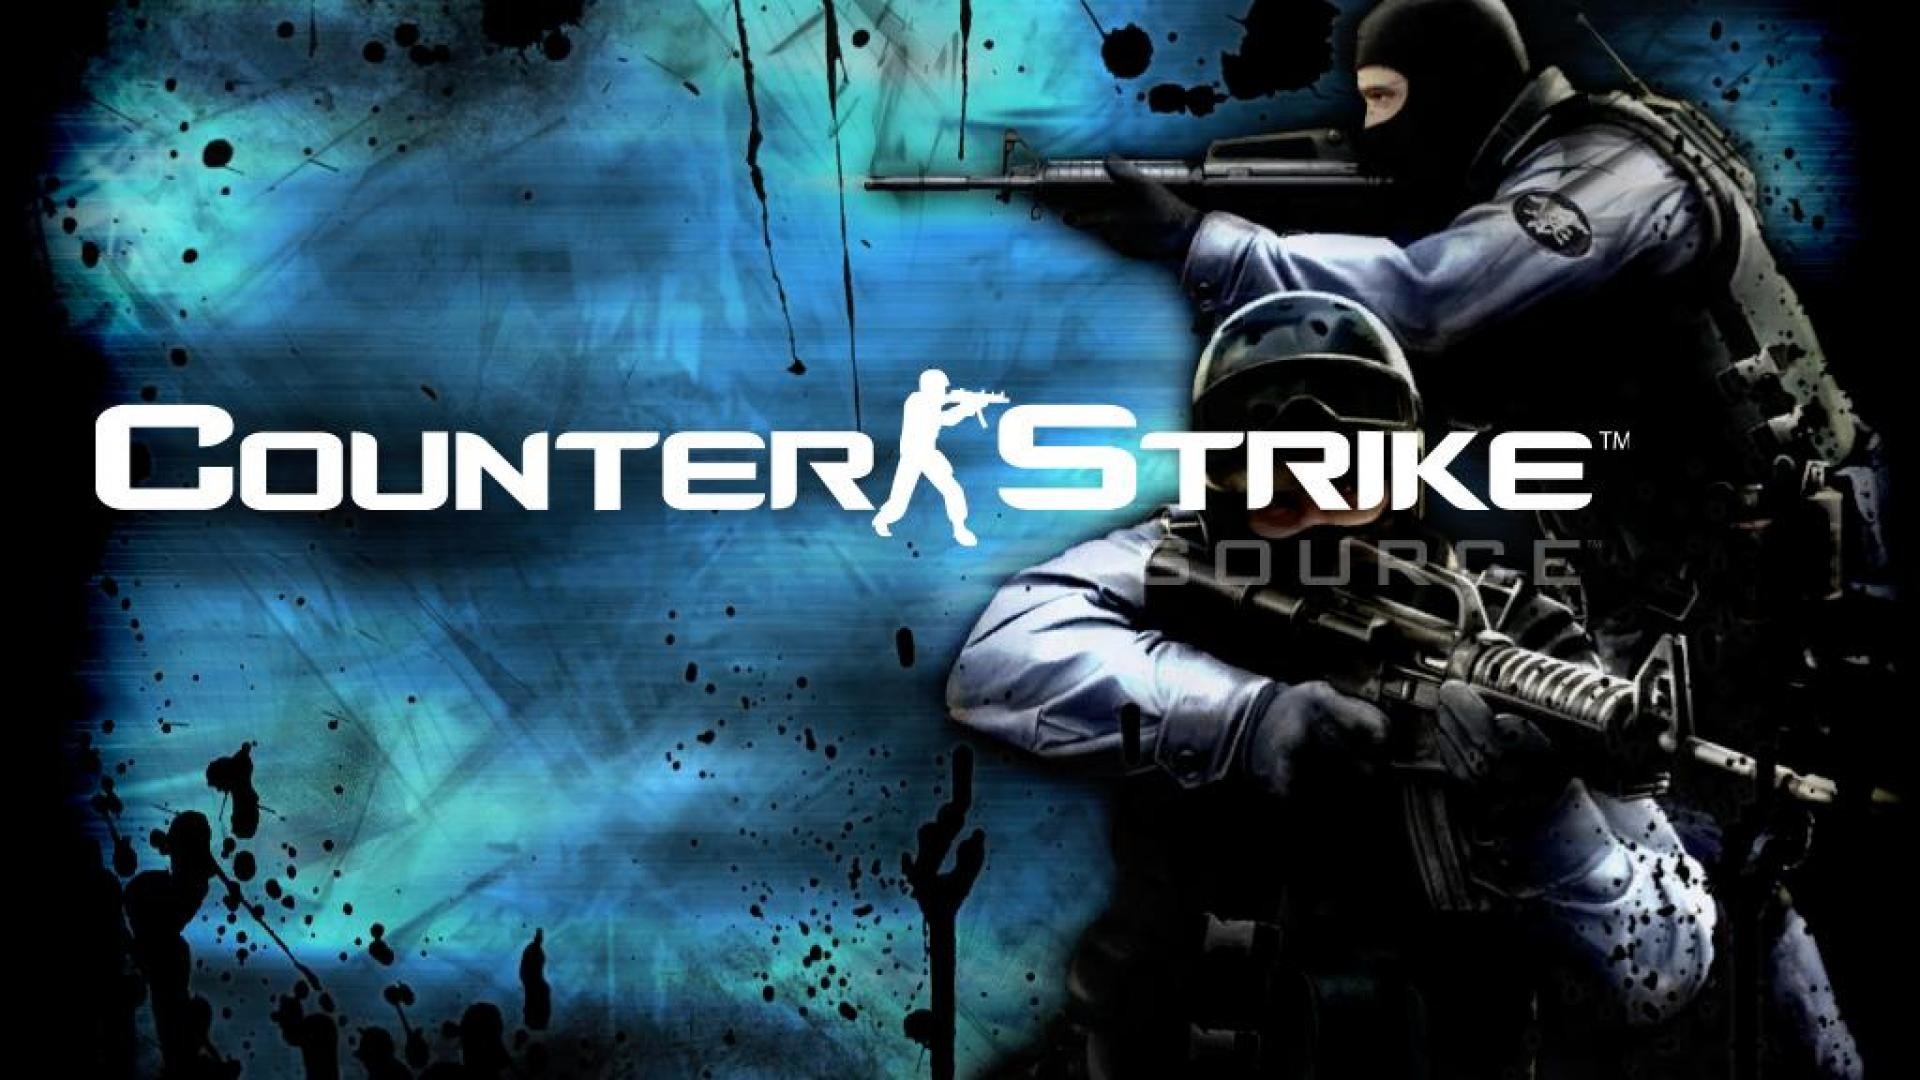 Counter-Strike 1.6 Wallpapers